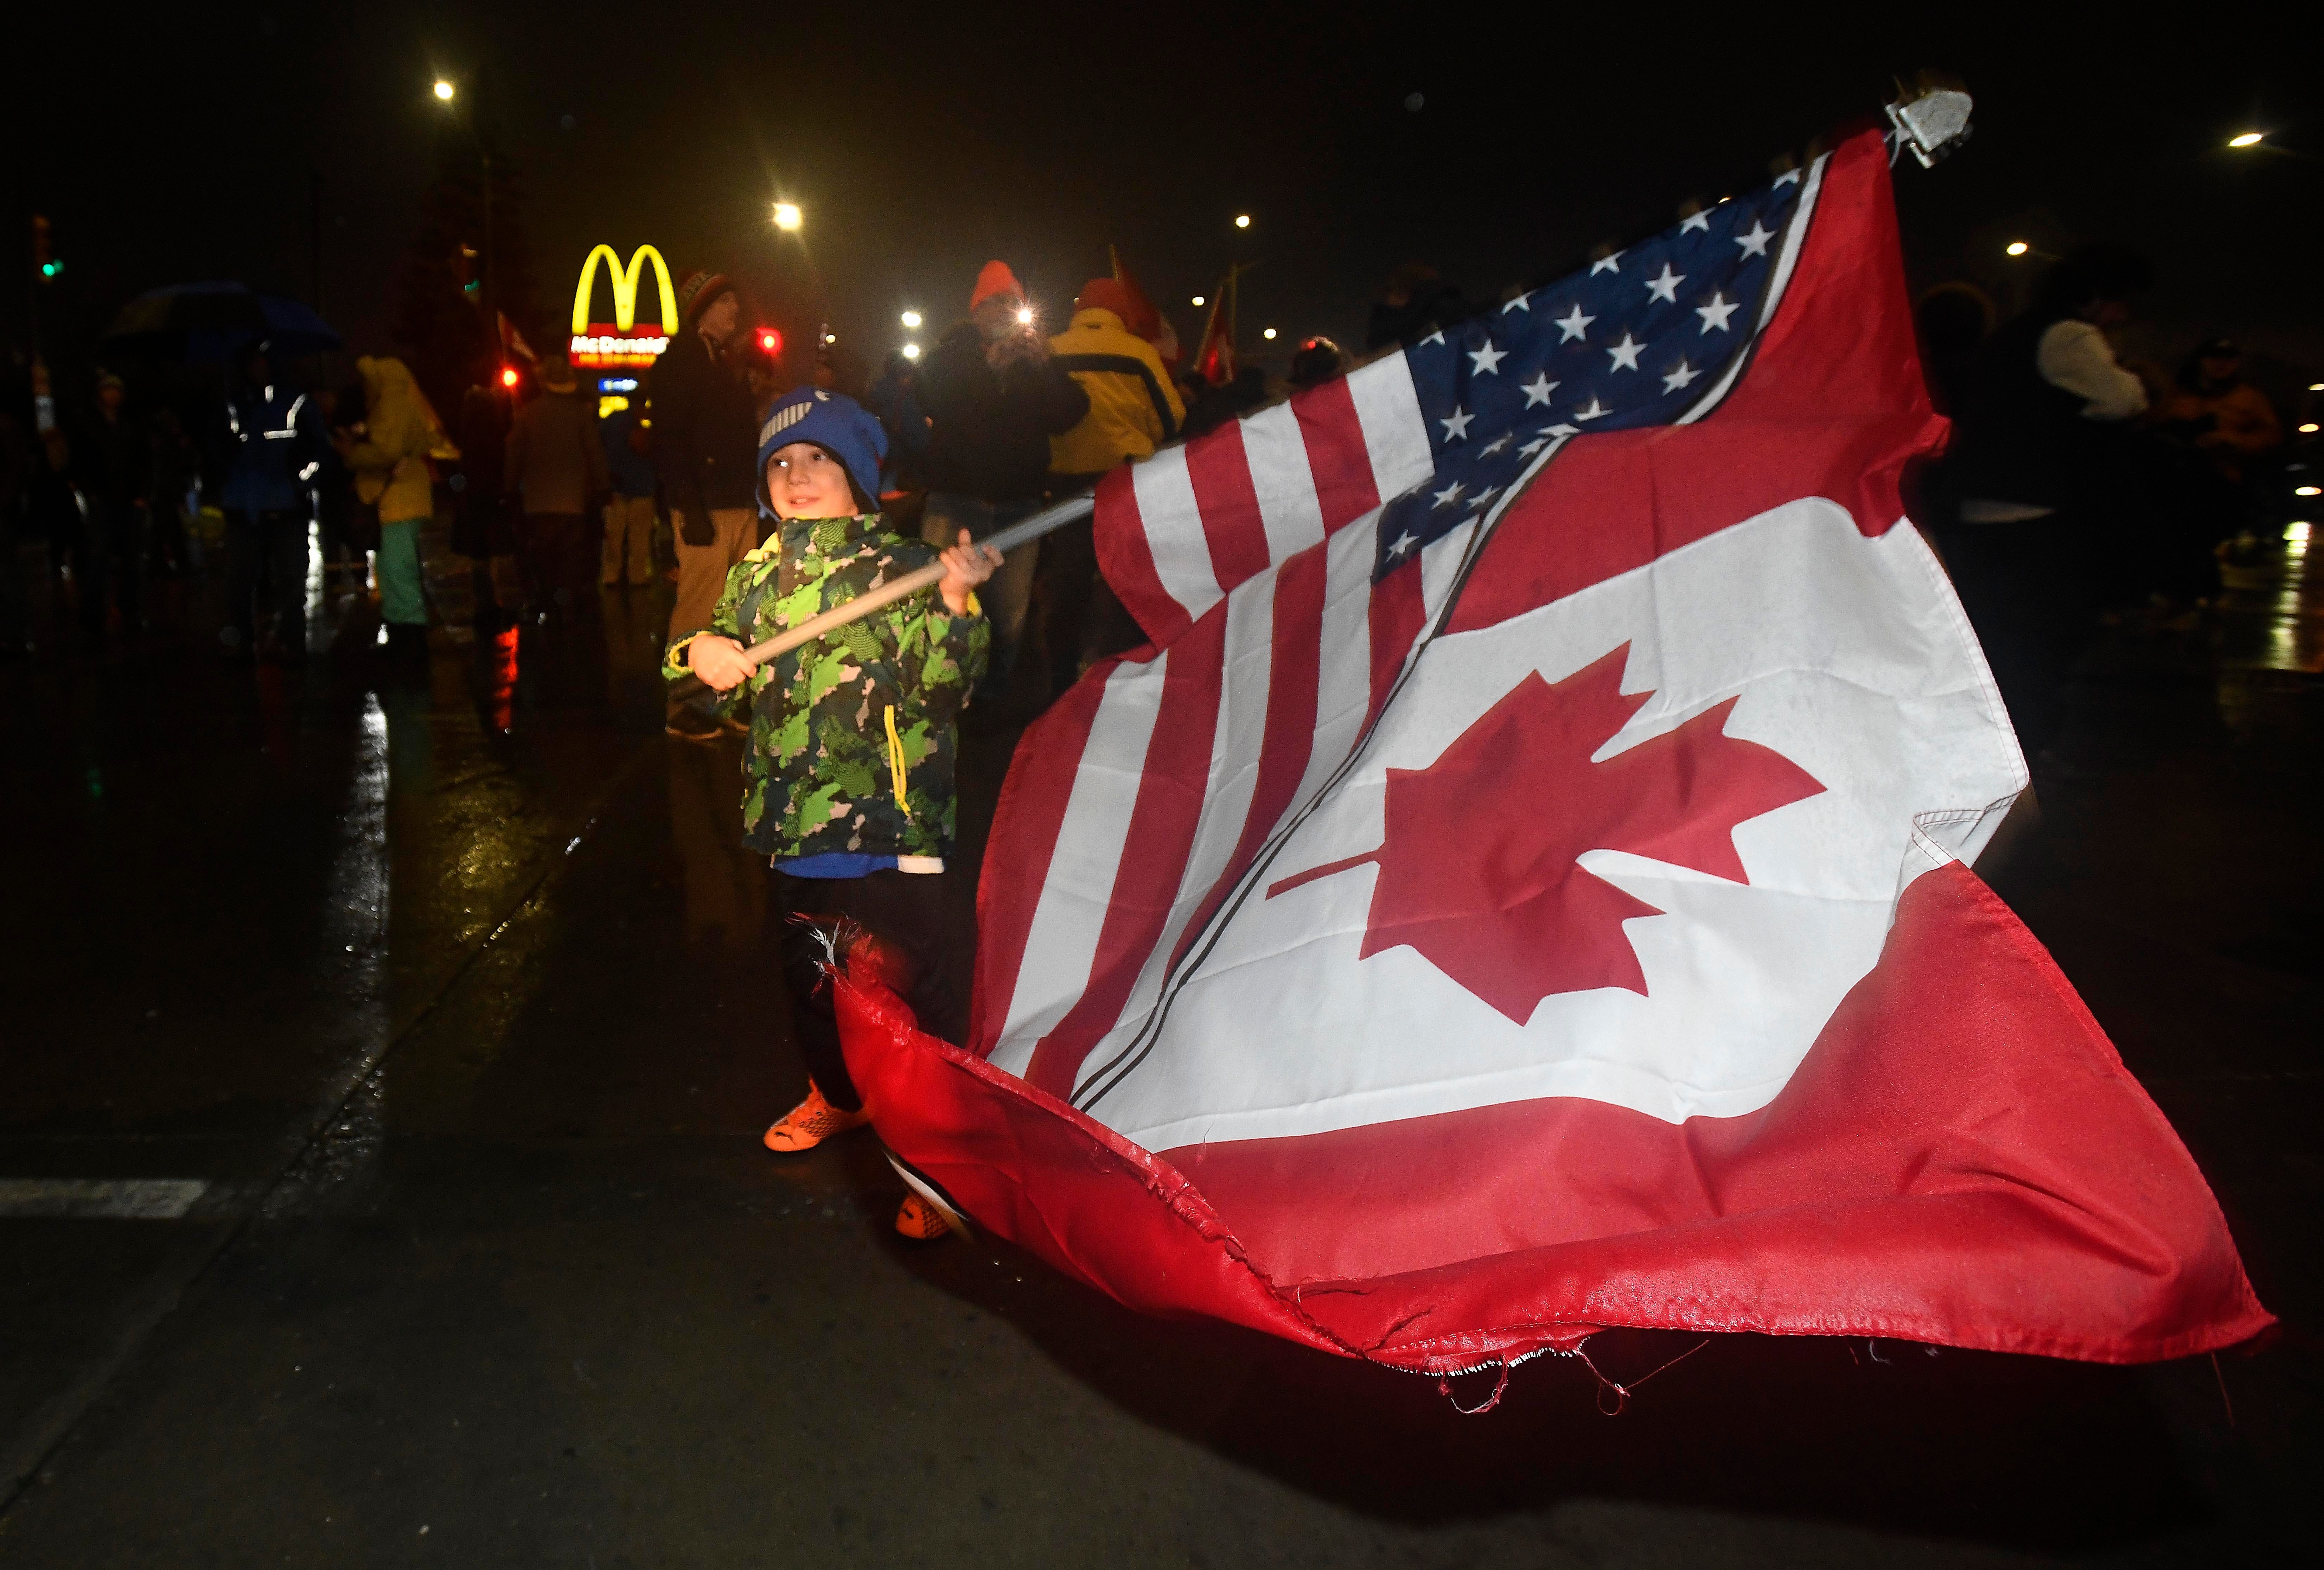 A young protester waves a half Canadian/half American flag in the street in Windsor, Canada on February 11, 2022 during a Canadian Freedom Convoy border blockade Friday night.